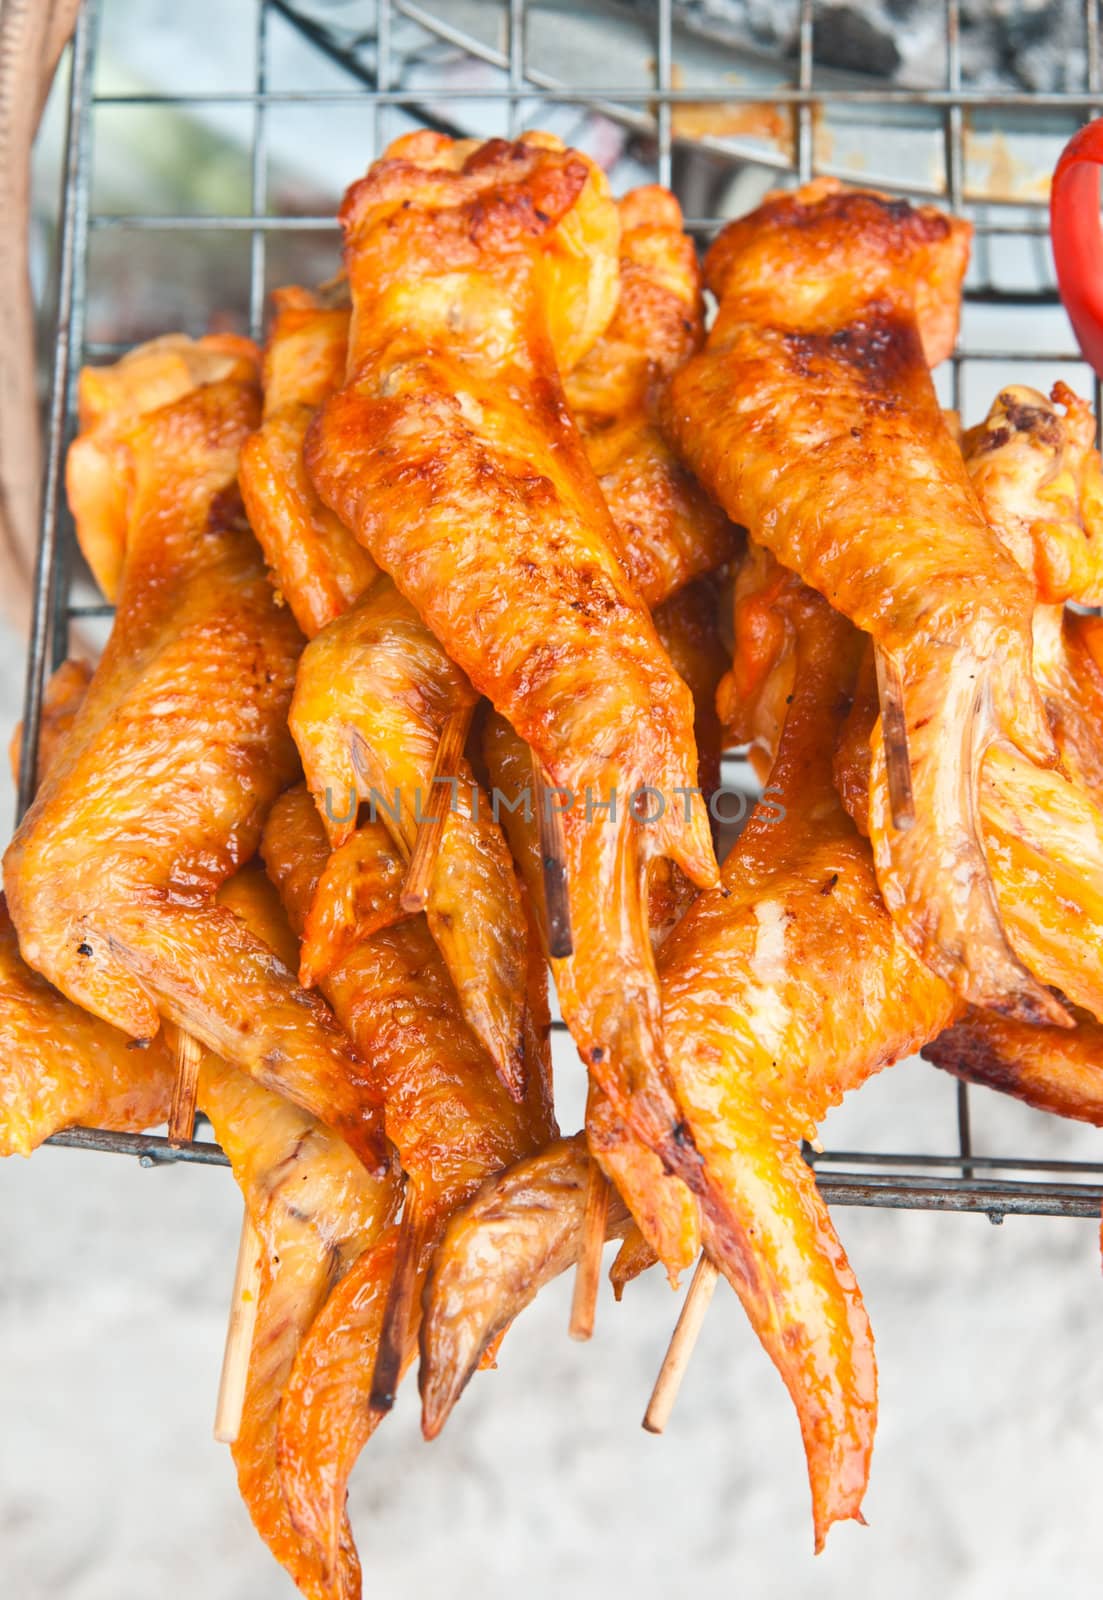 Grilled Chicken Wings on barbecue grill